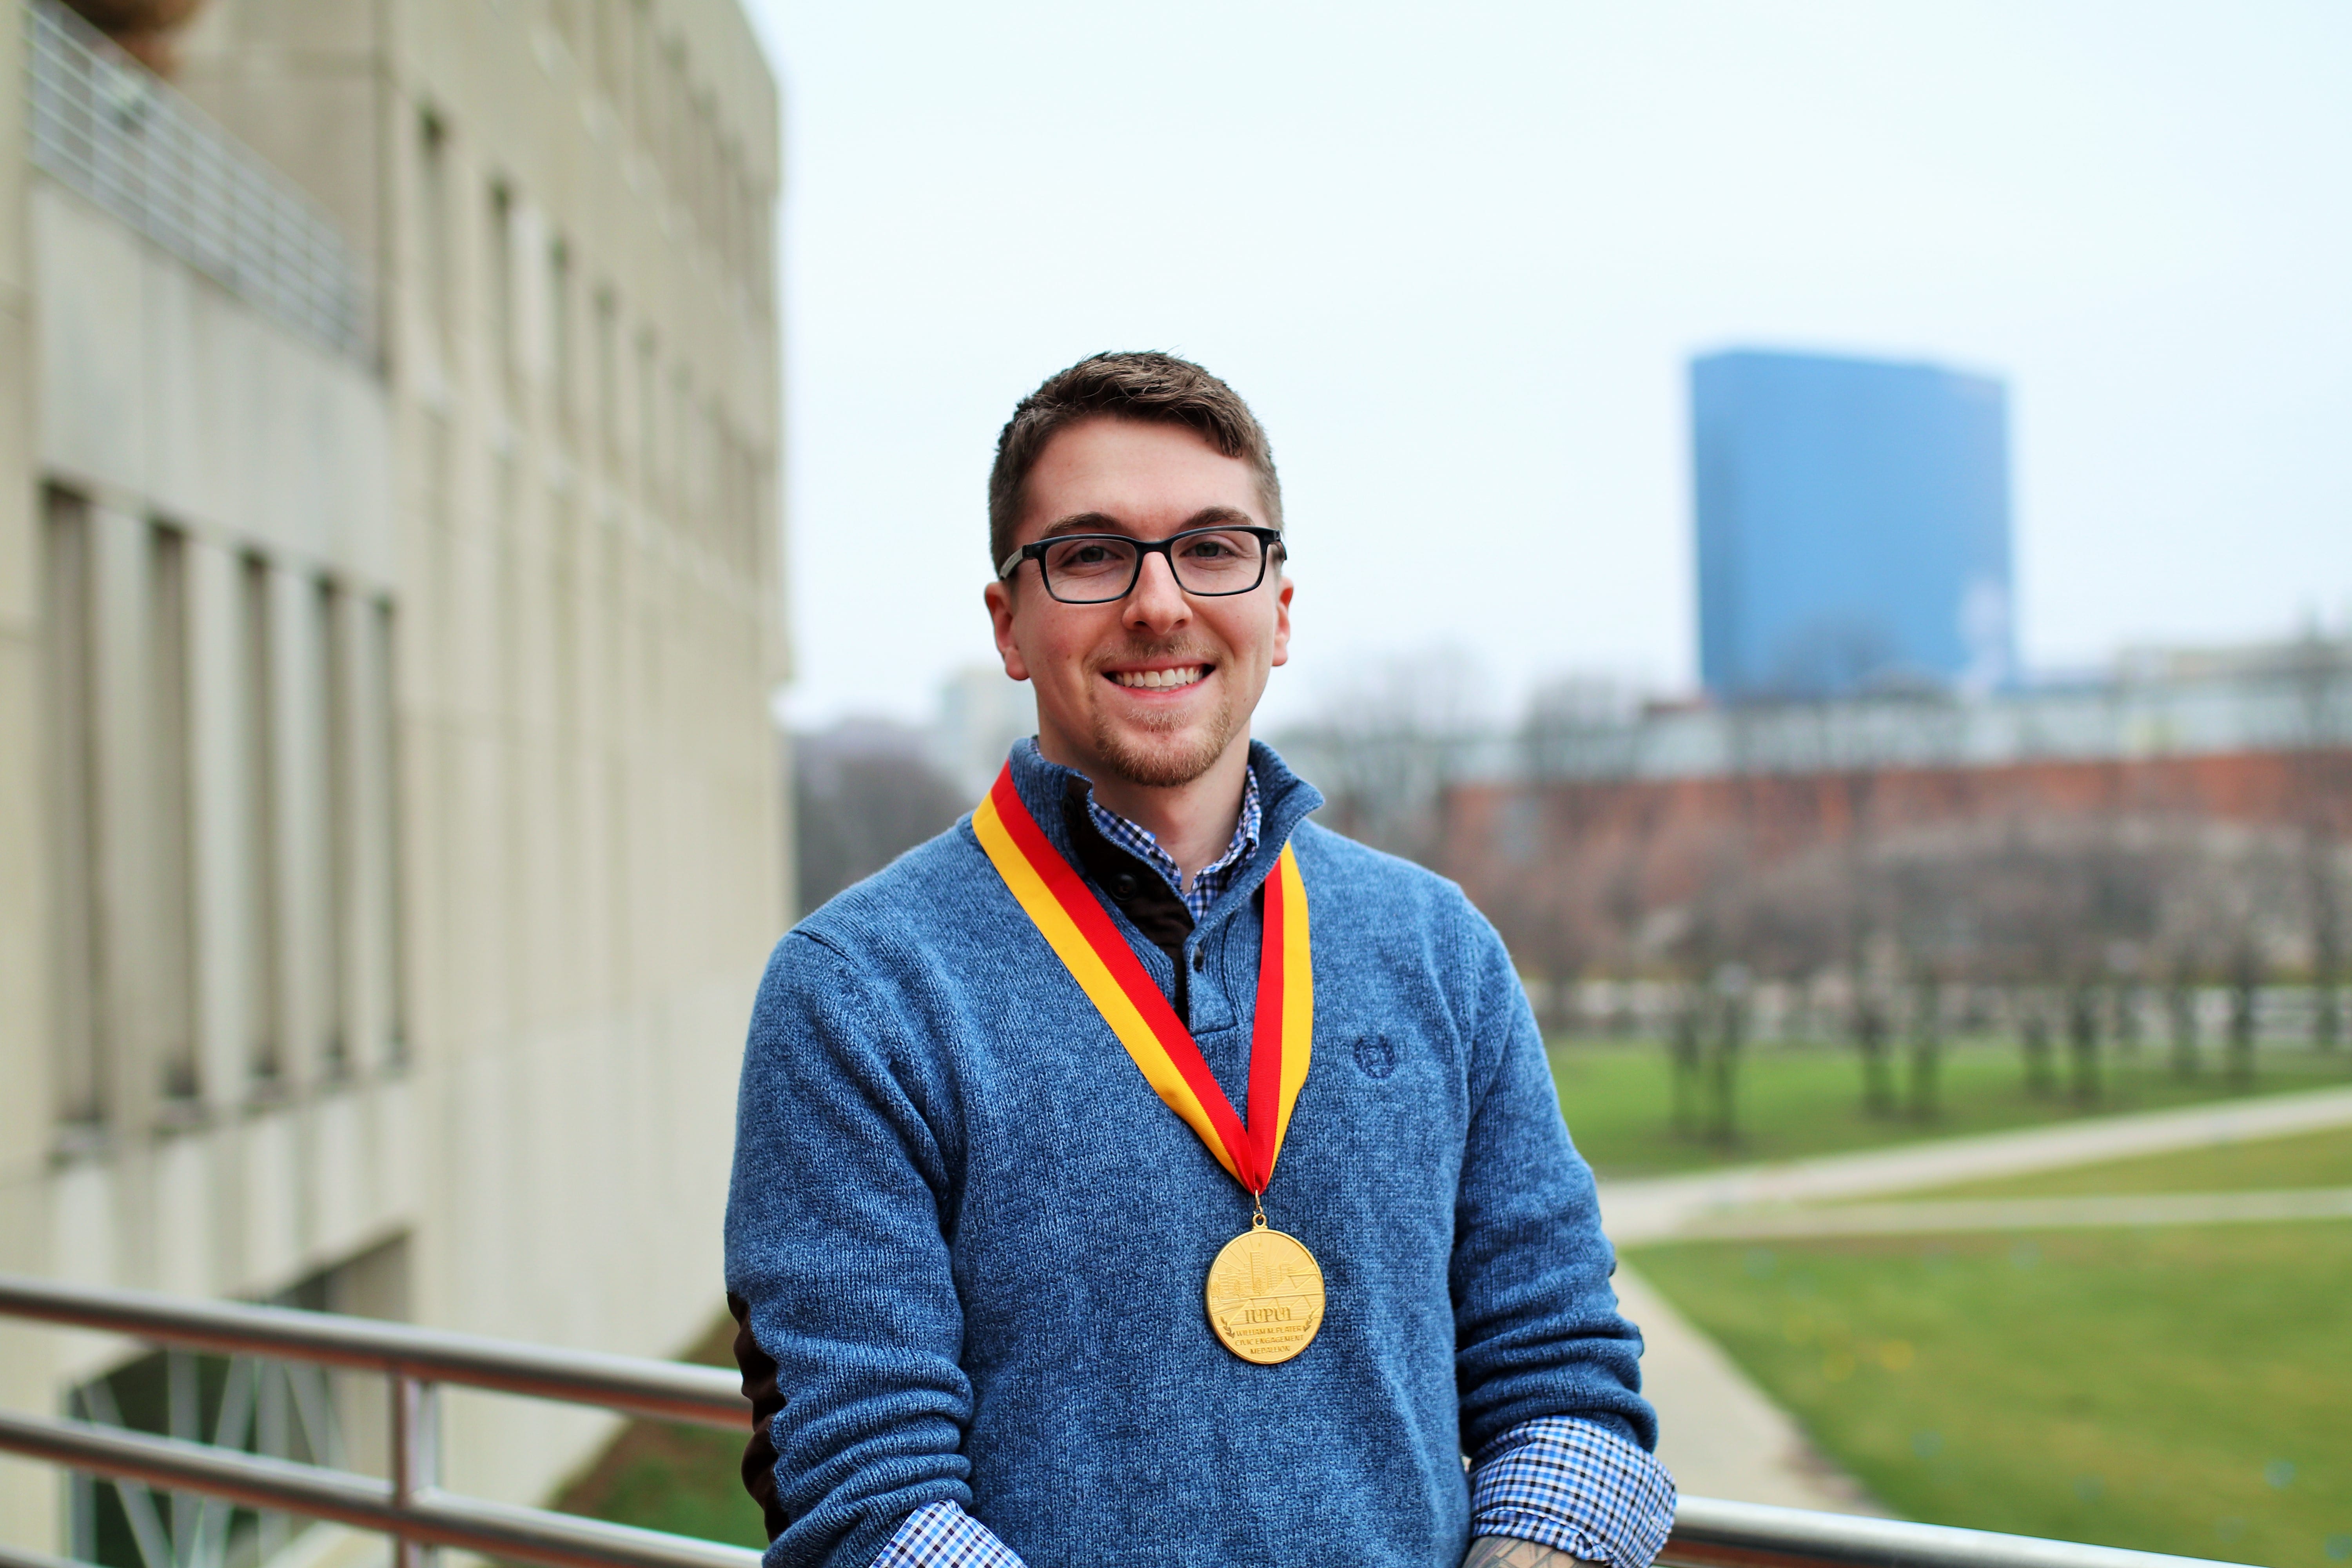 SPEA's Spencer Lawson earned the Plater Medallion for his research and impact on the community.